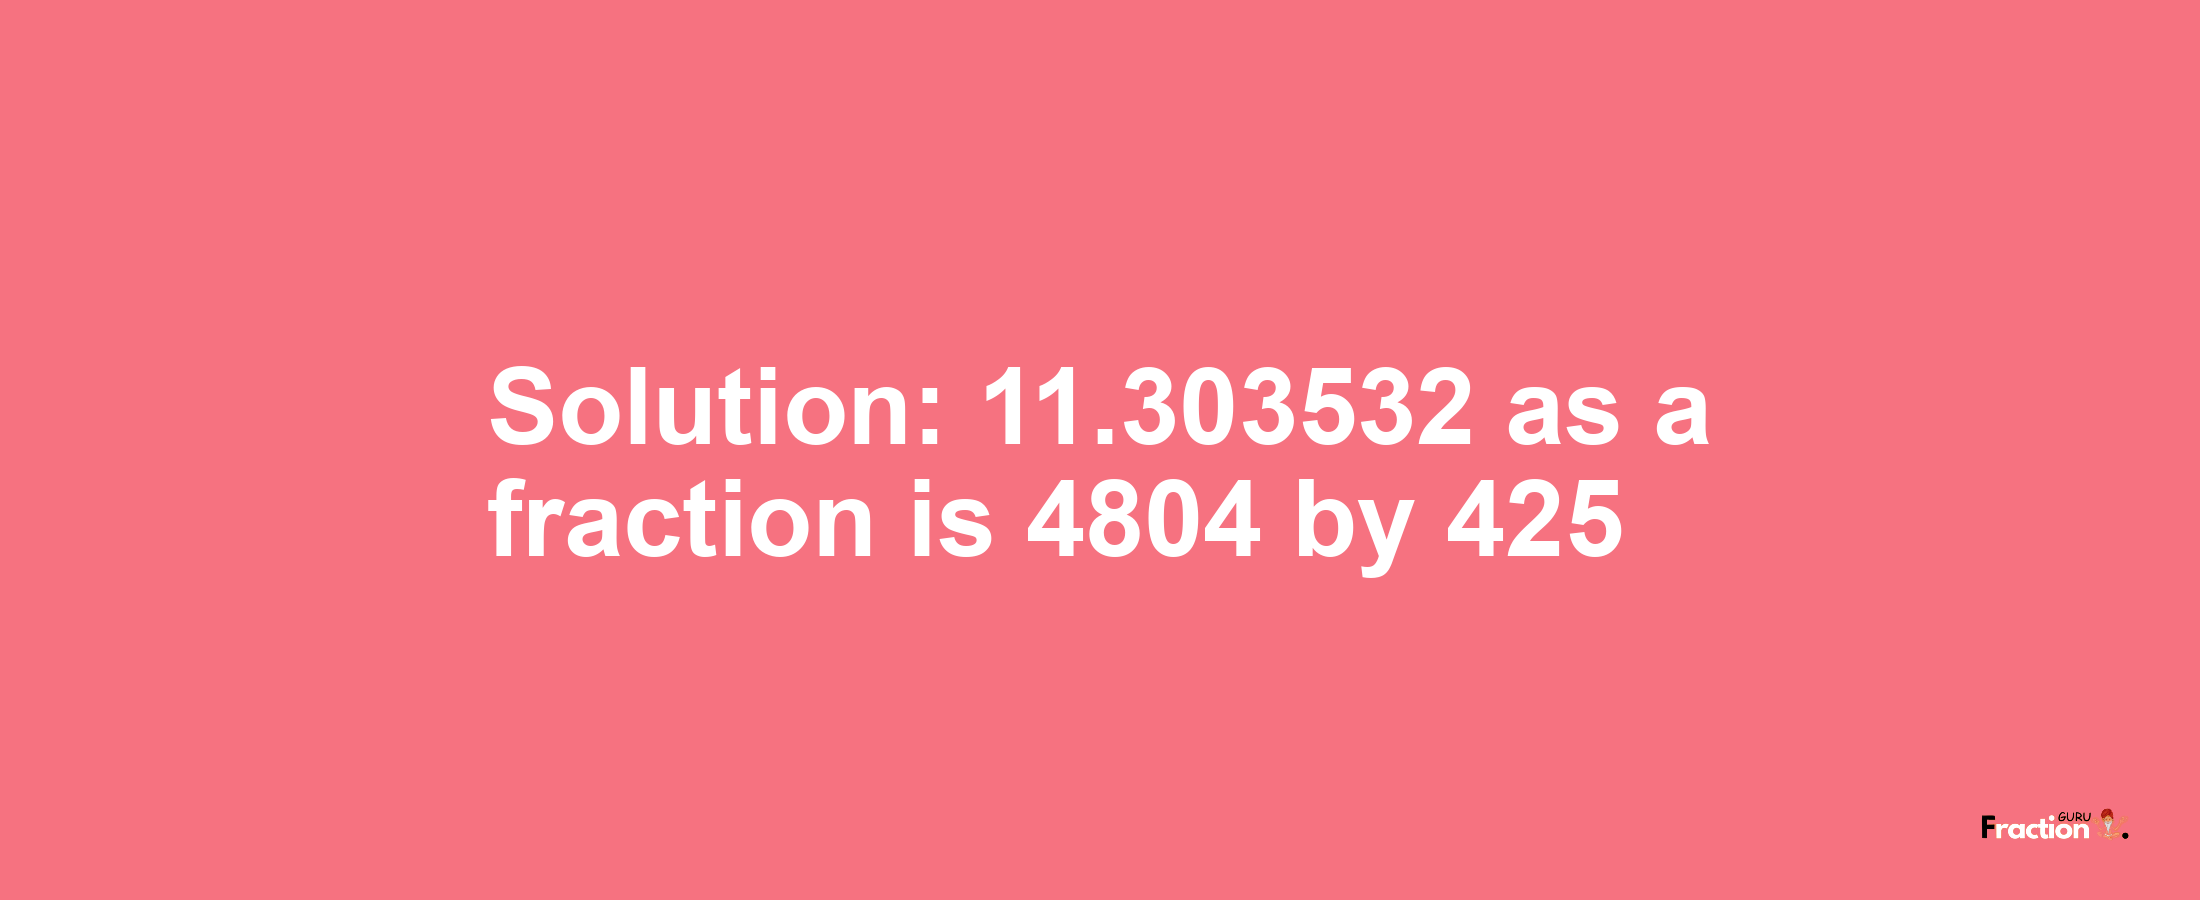 Solution:11.303532 as a fraction is 4804/425